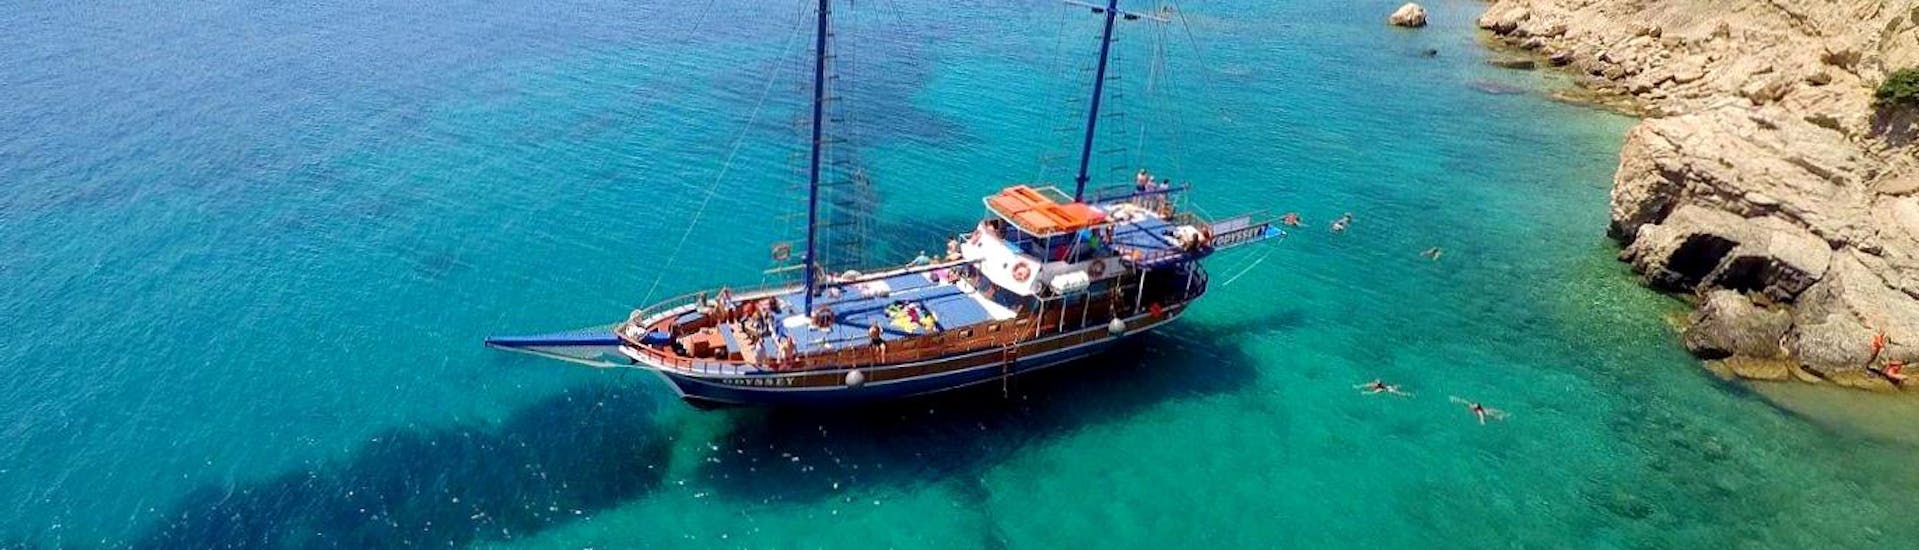 An elegant sailboat with participants enjoying a day out in the Greek waters during a sailing boat trip to the islands Kalymnos, Plati & Pserimos with Odyssey Boat Kos.